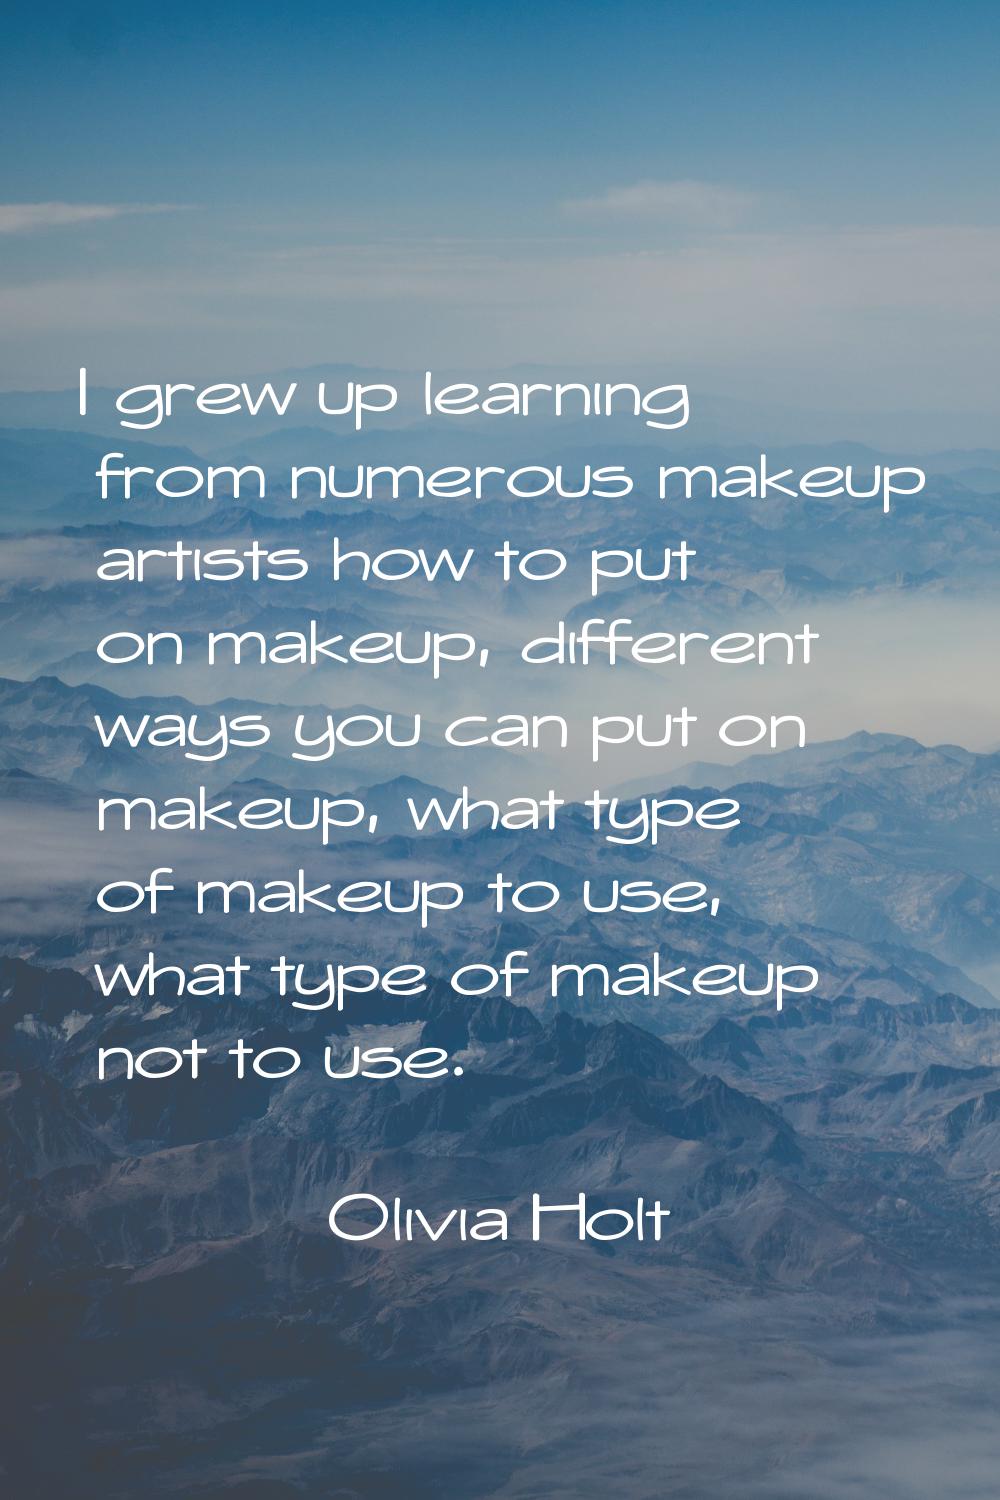 I grew up learning from numerous makeup artists how to put on makeup, different ways you can put on